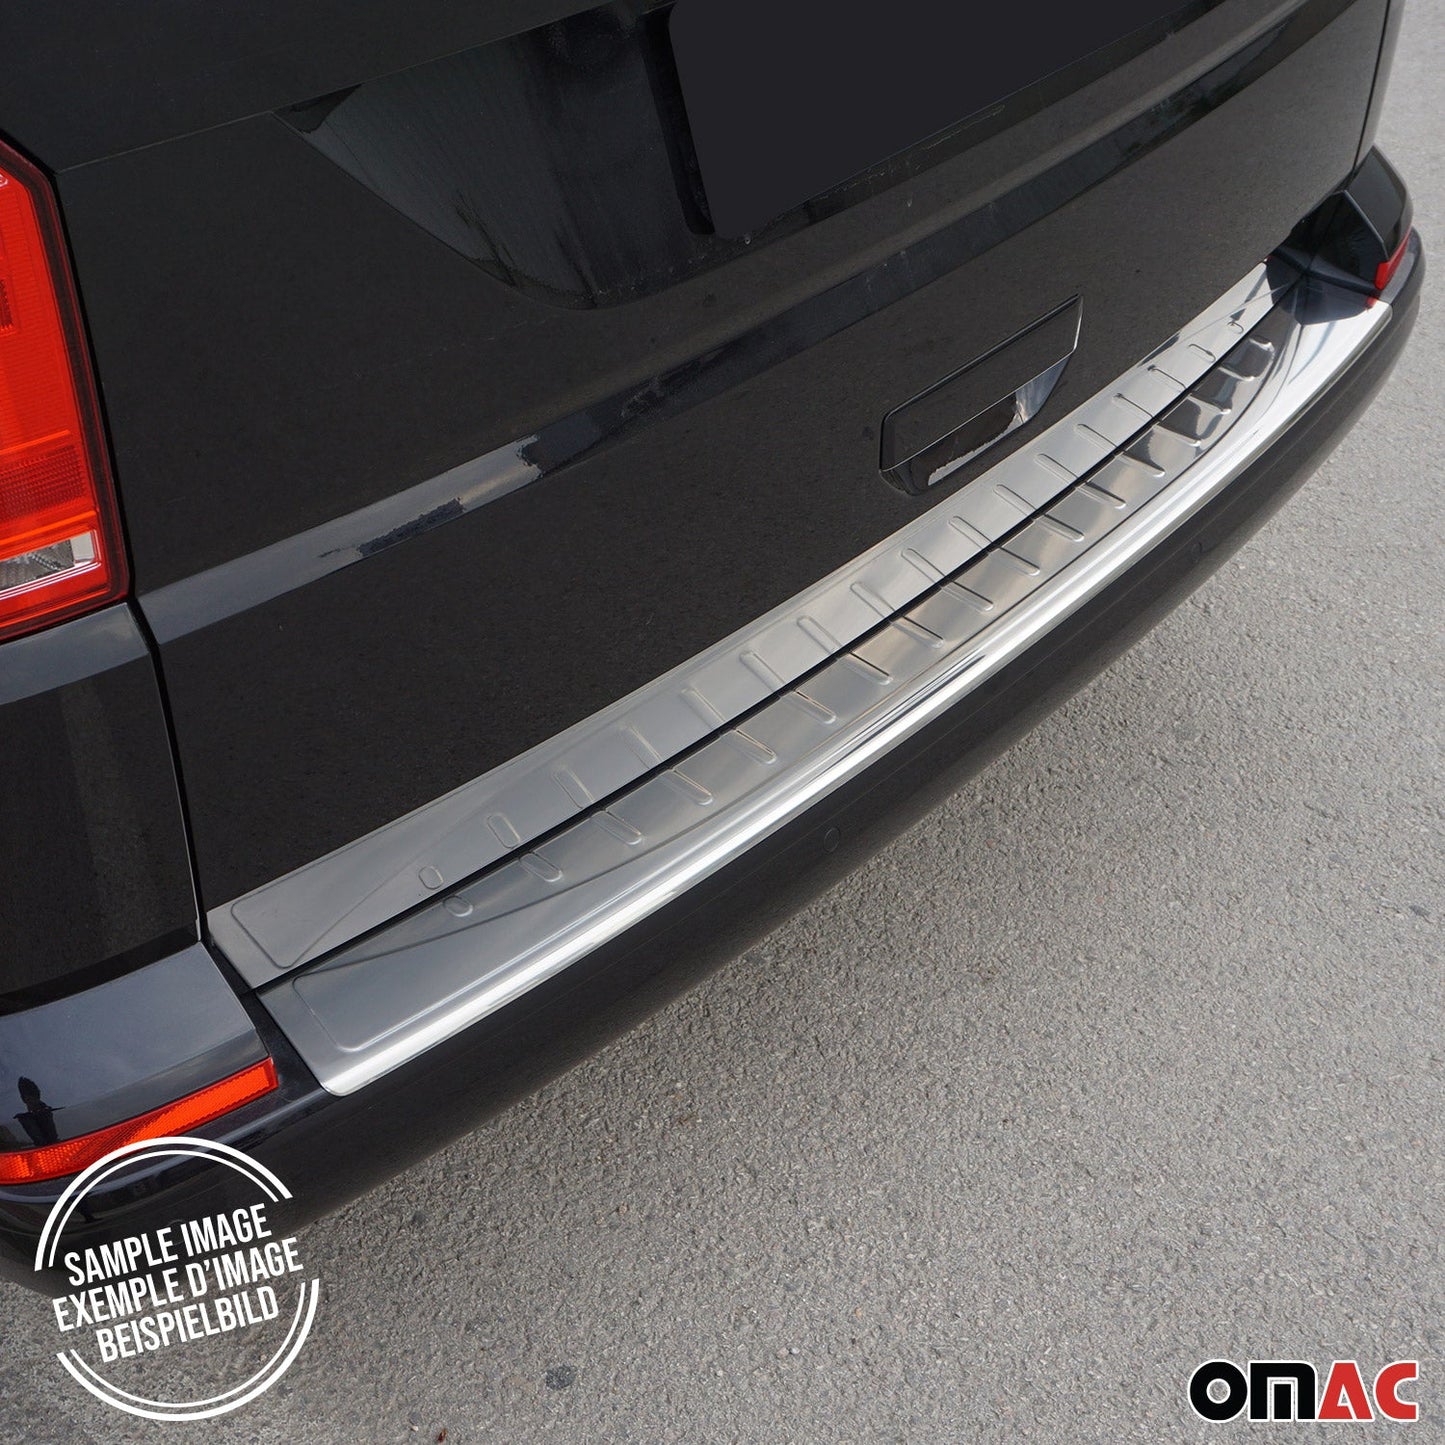 OMAC Rear Bumper Guard for BMW X5 F15 2014-2018 Trunk Sill Protector Brushed 1221094T